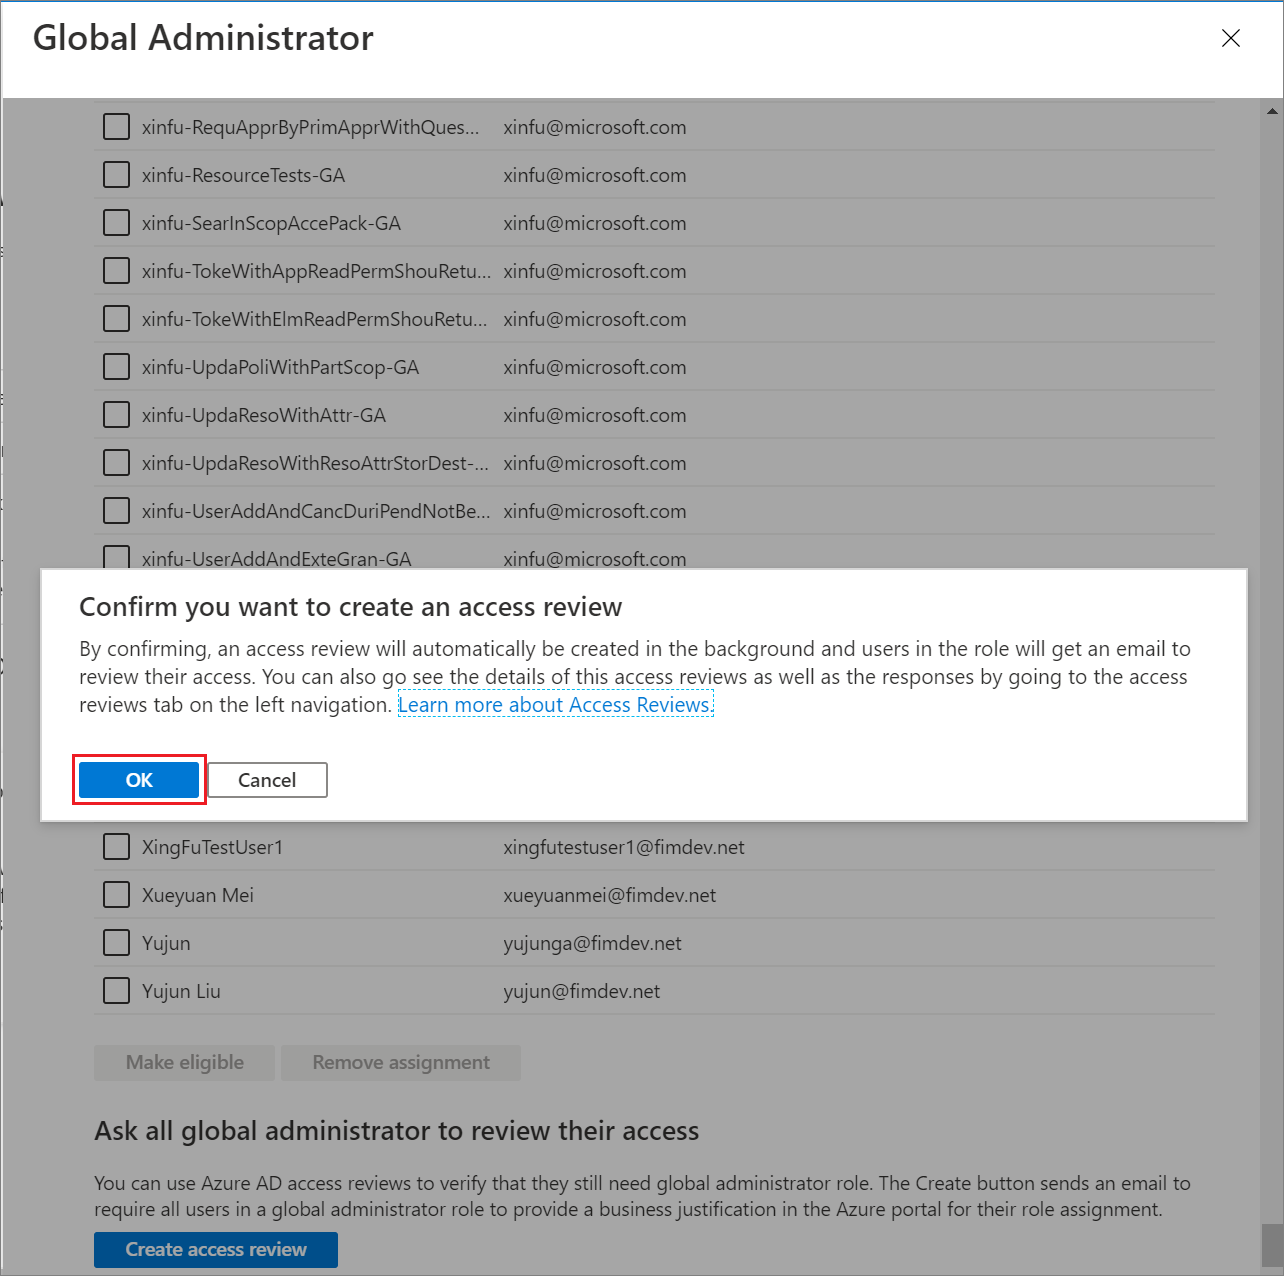 Global administrators page showing access reviews section